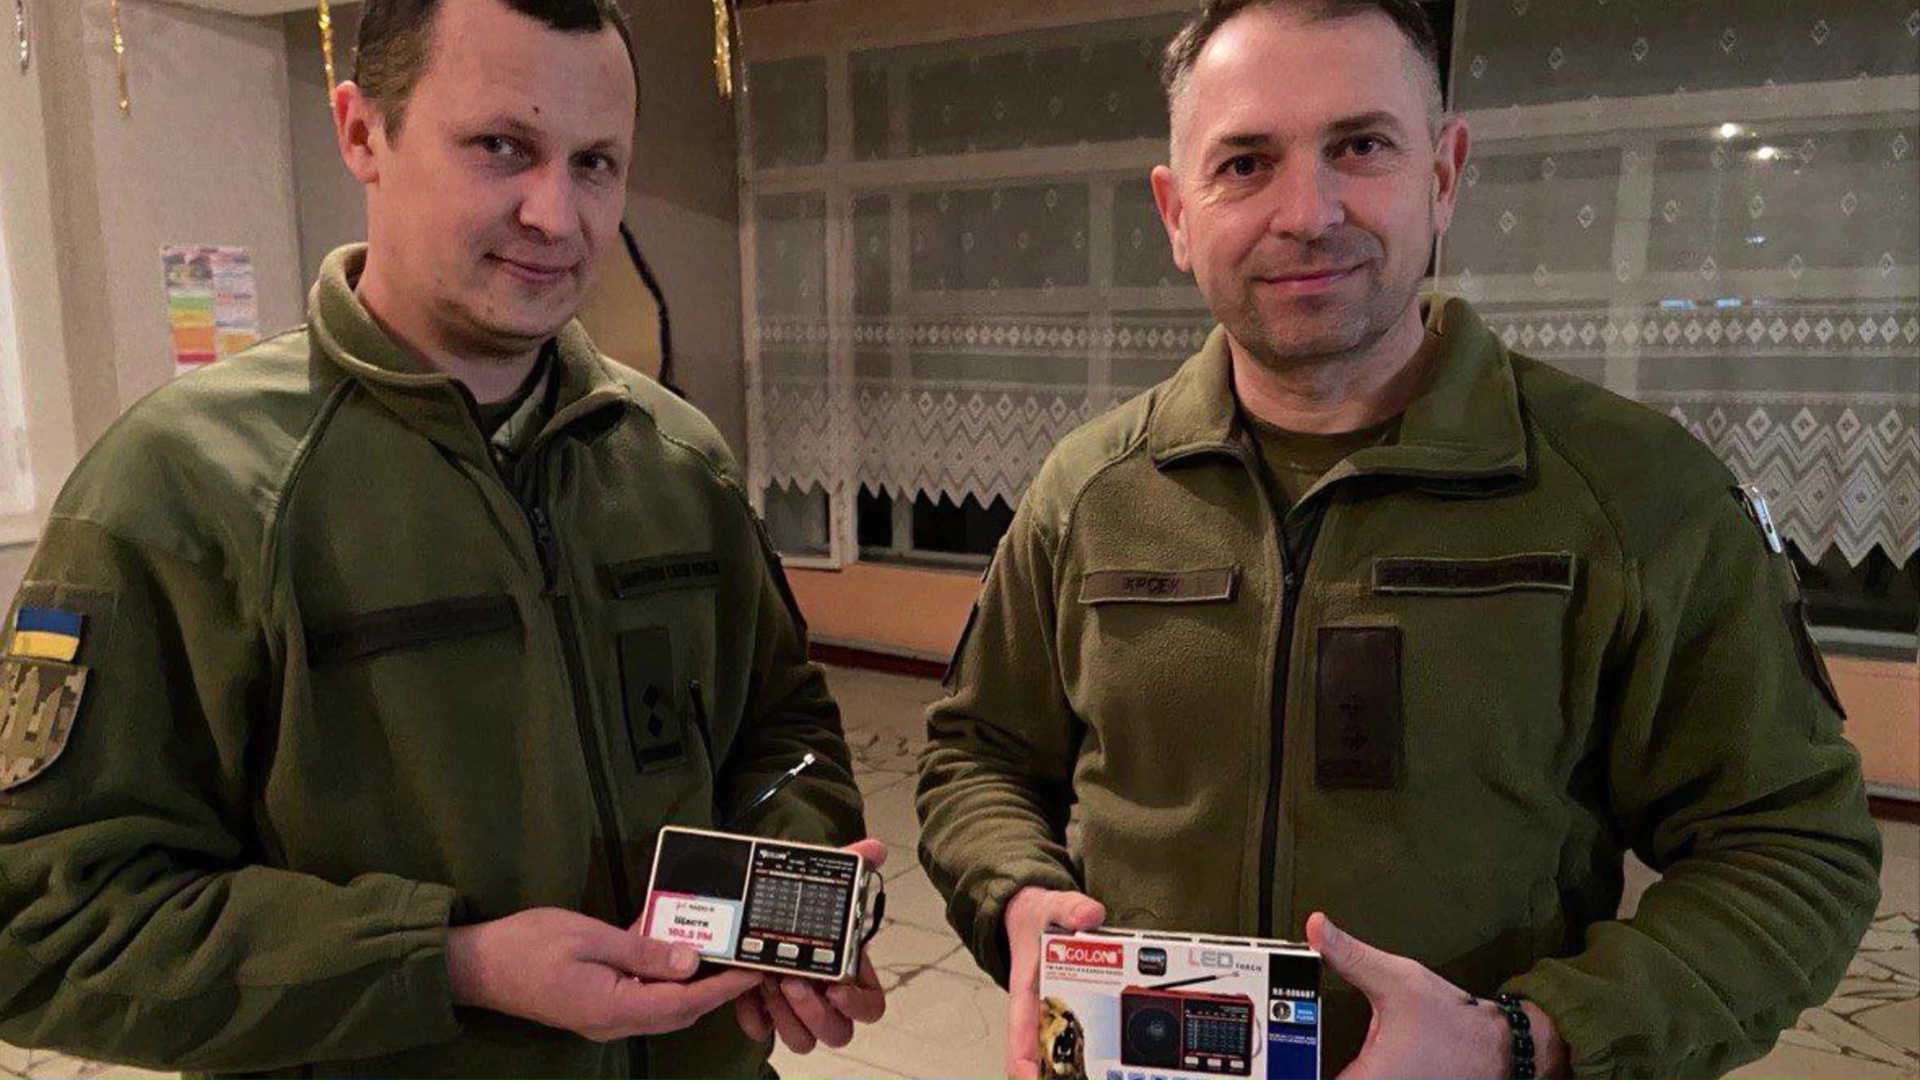 FEBC Ukraine is ensuring they can hear the Gospel message through their distribution of solar powered radios.